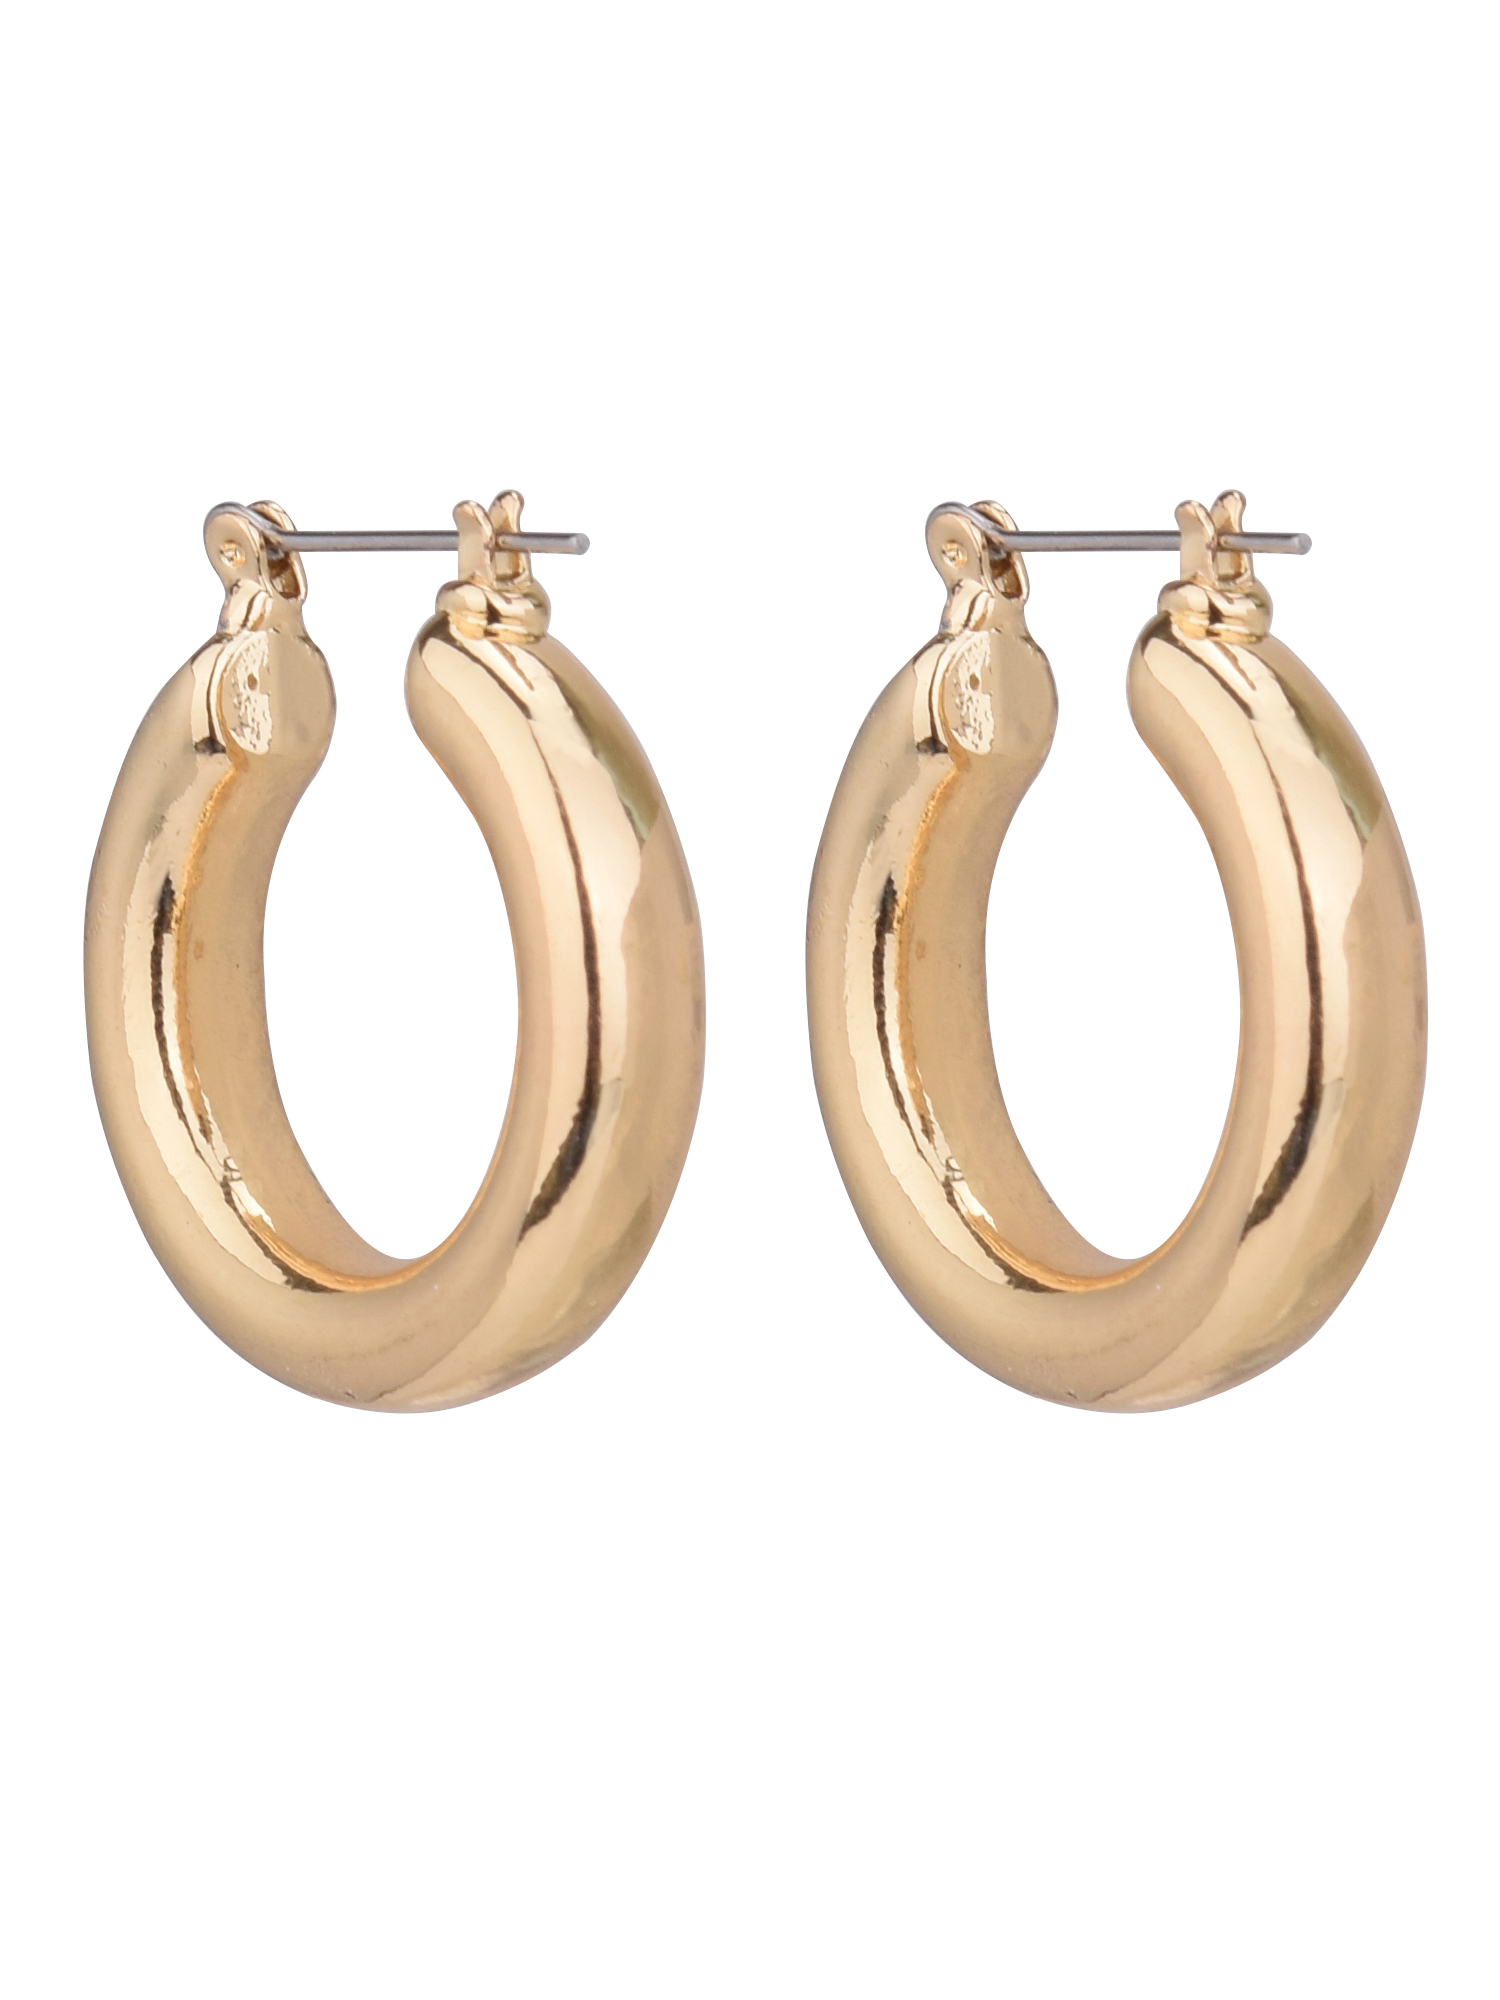 Time and Tru Women's Gold Medium Thick Hoop Earring - image 4 of 5